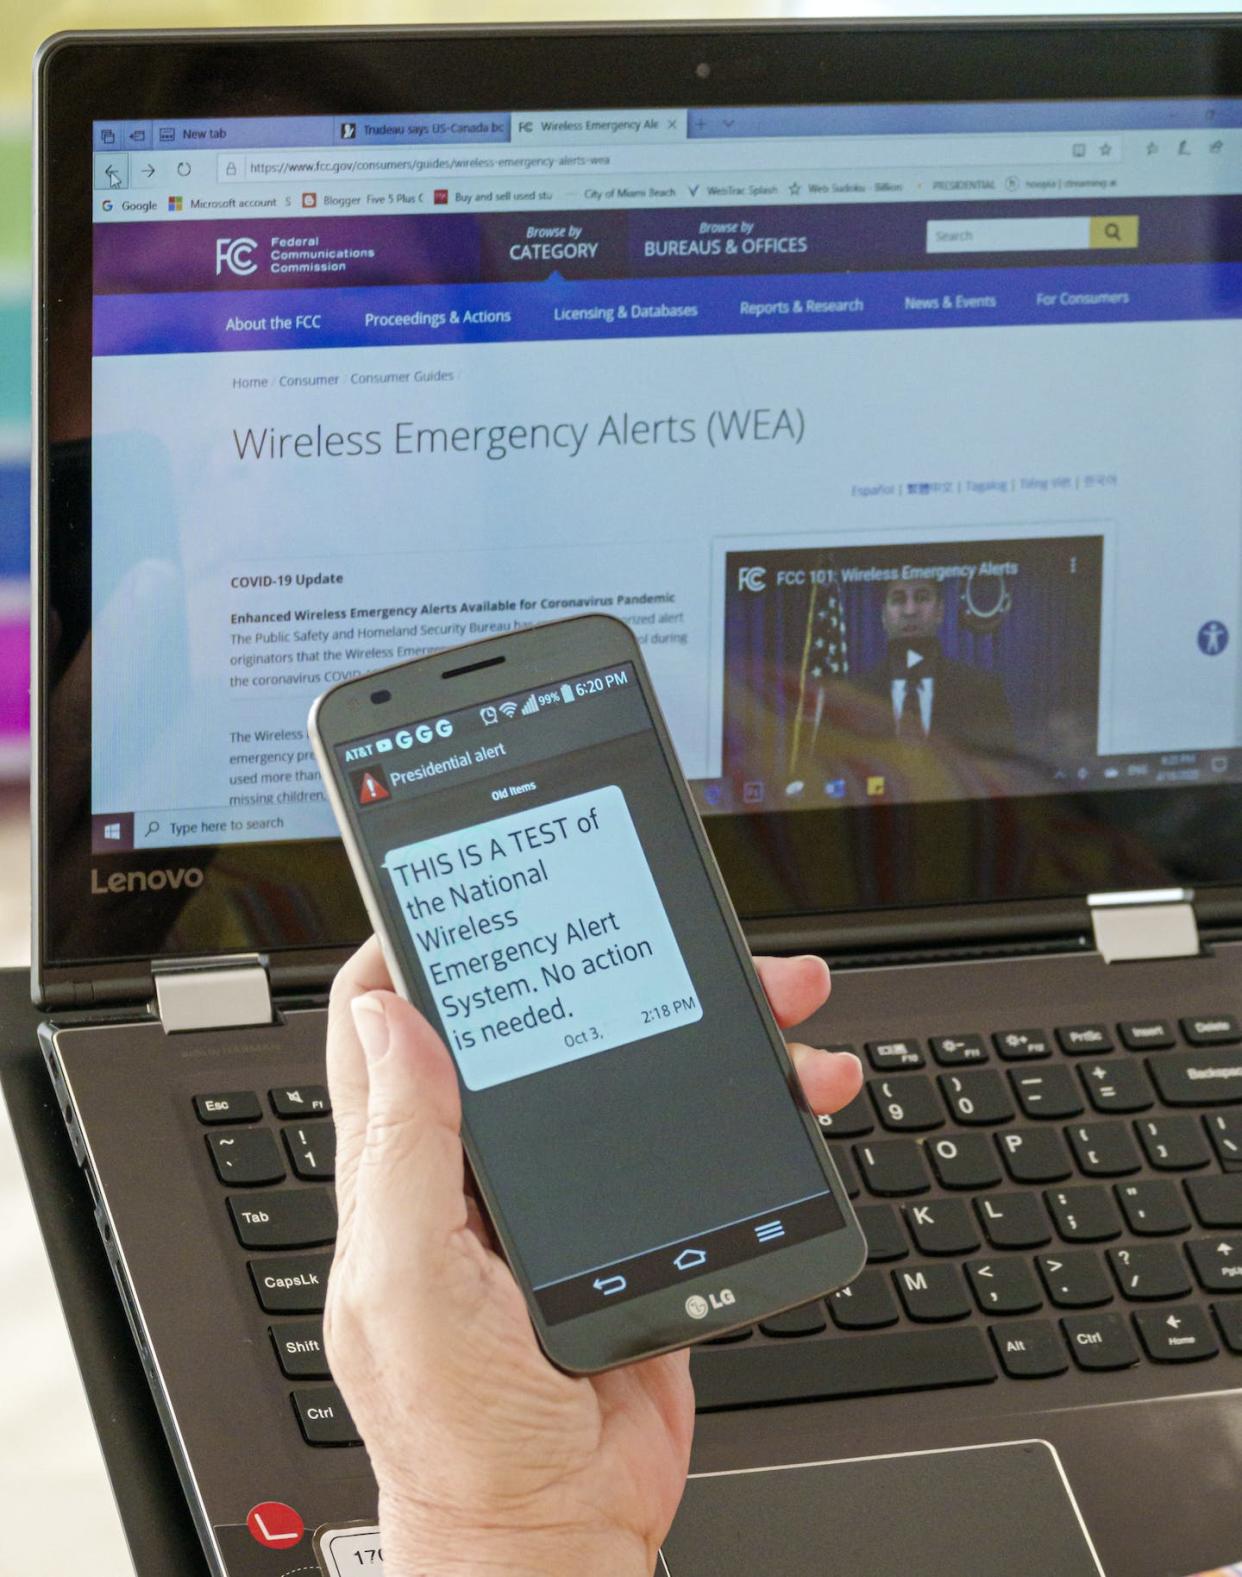 Nationwide test of Wireless Emergency Alert system could test people's